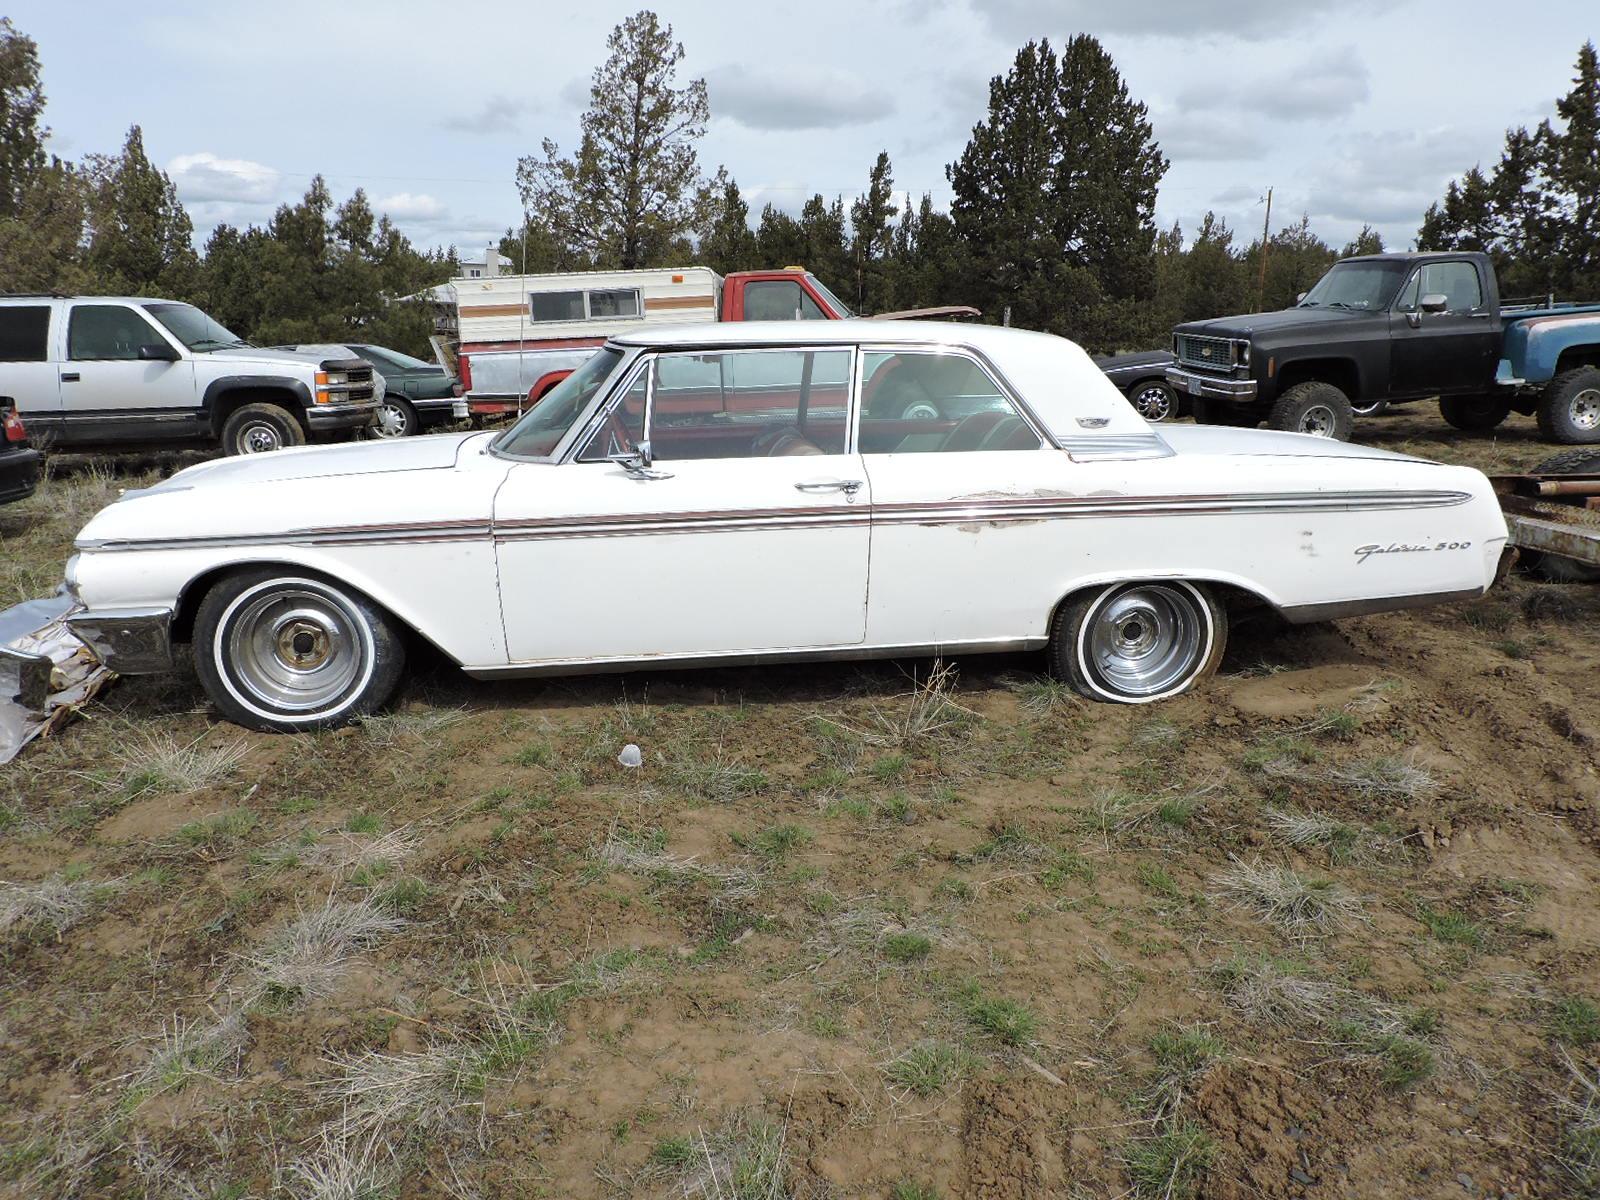 1962 Ford Galaxy 500 Coupe - Manual Transmission / 2 Sets of Bumpers